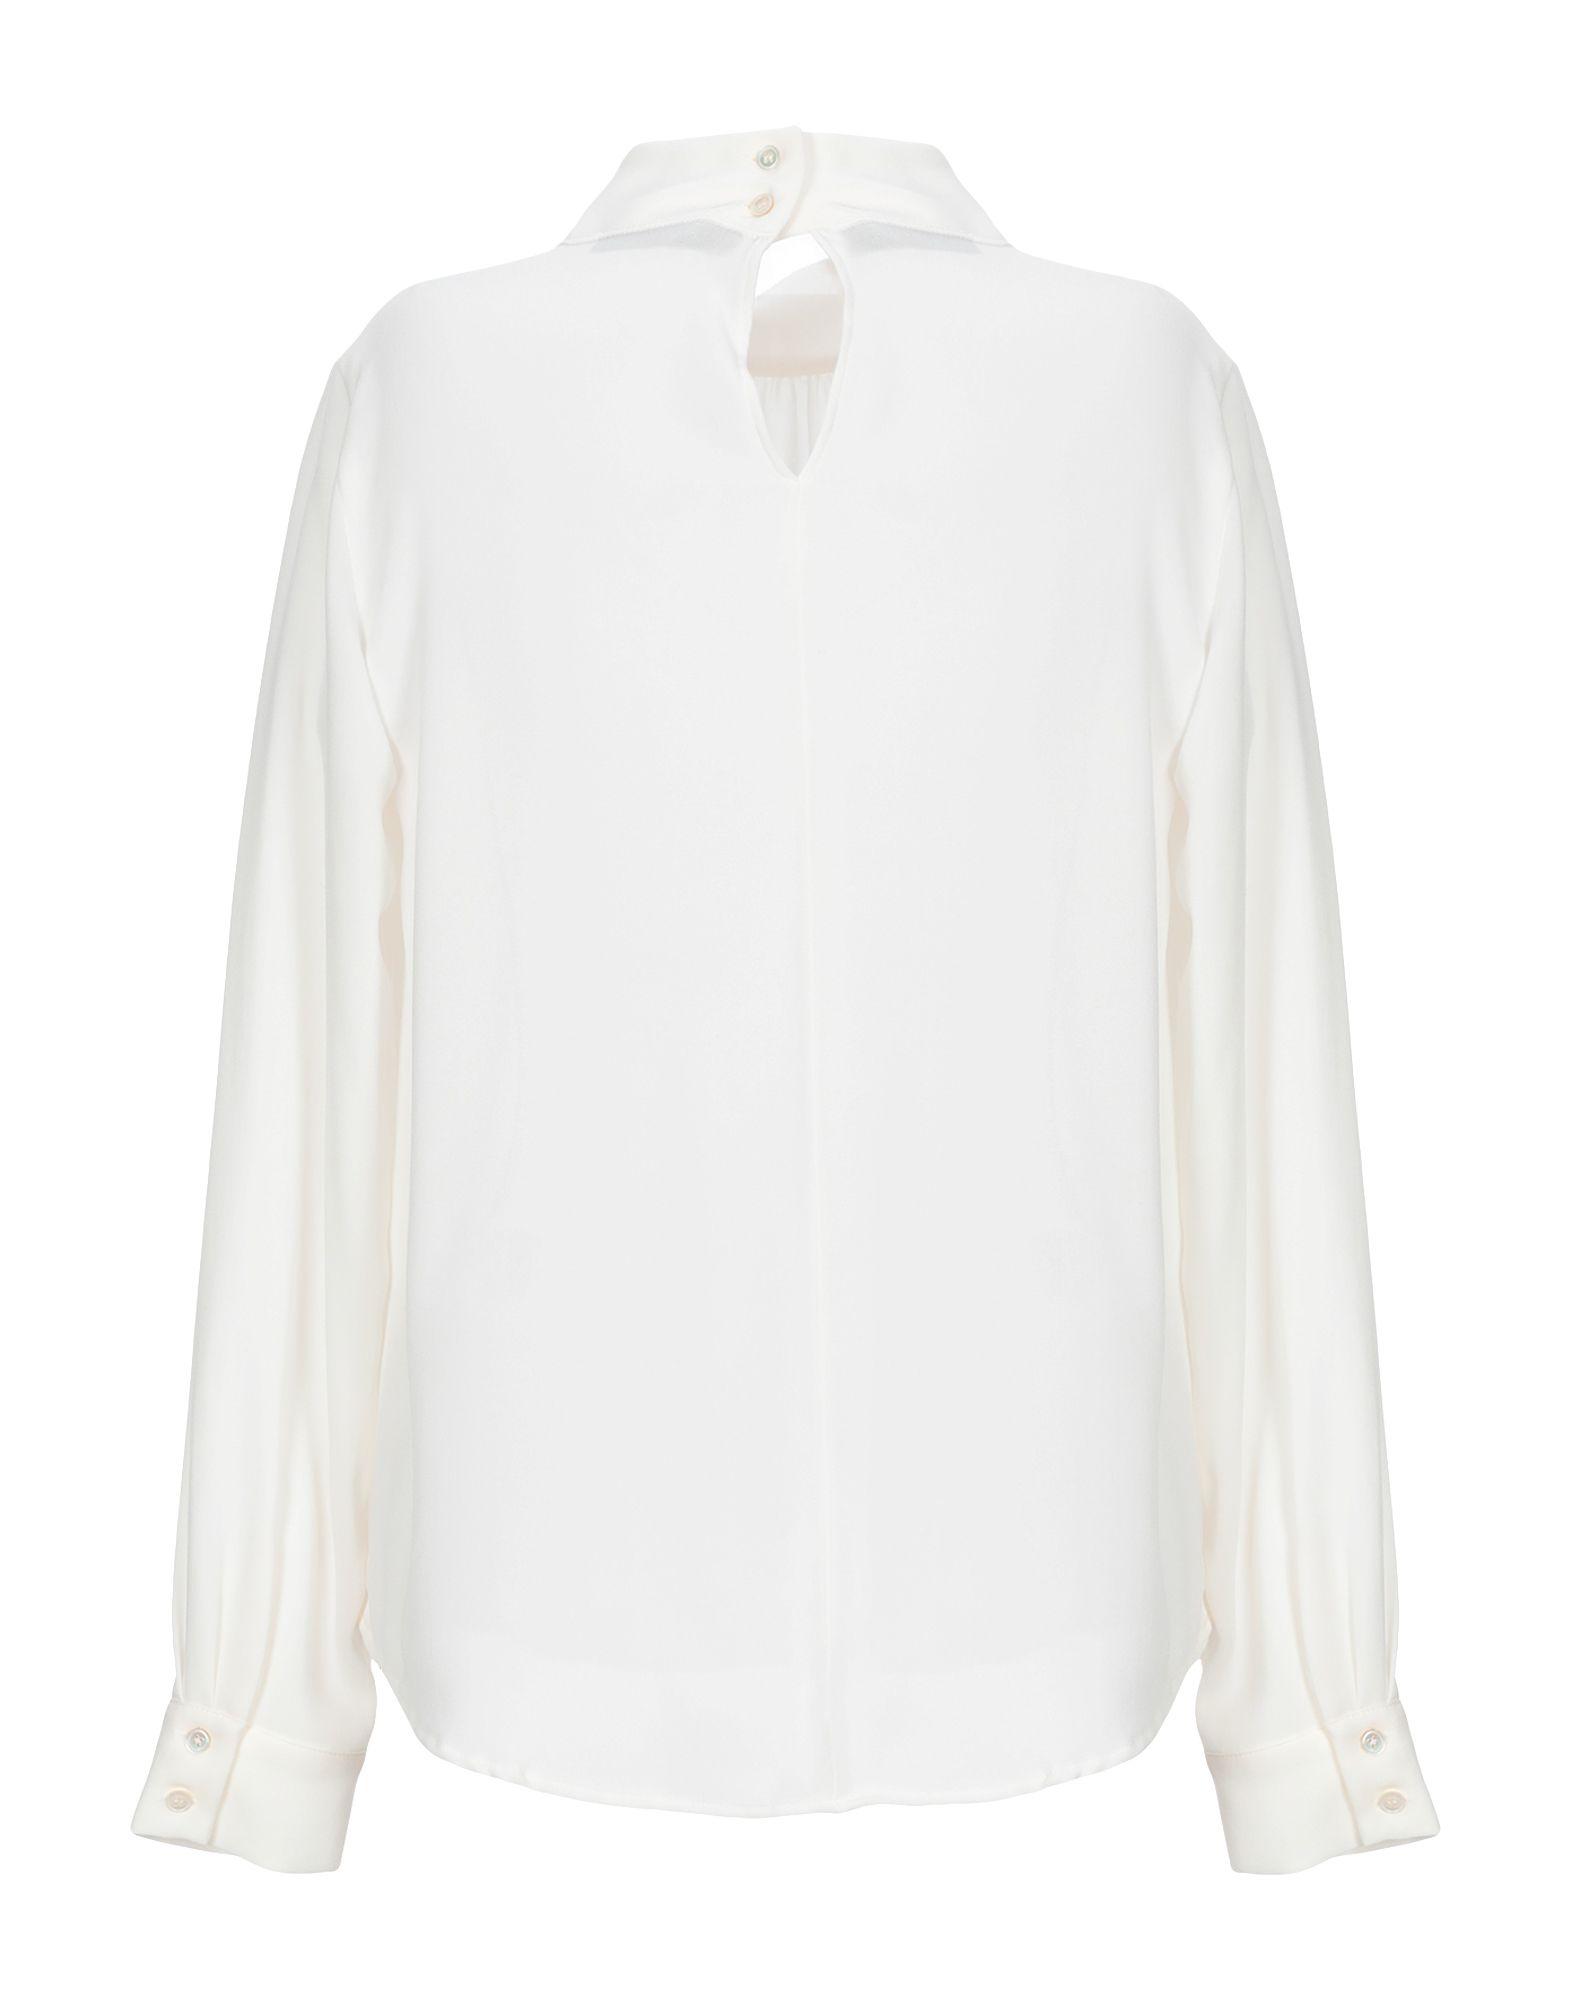 Marella Synthetic Blouse in Ivory (White) - Lyst